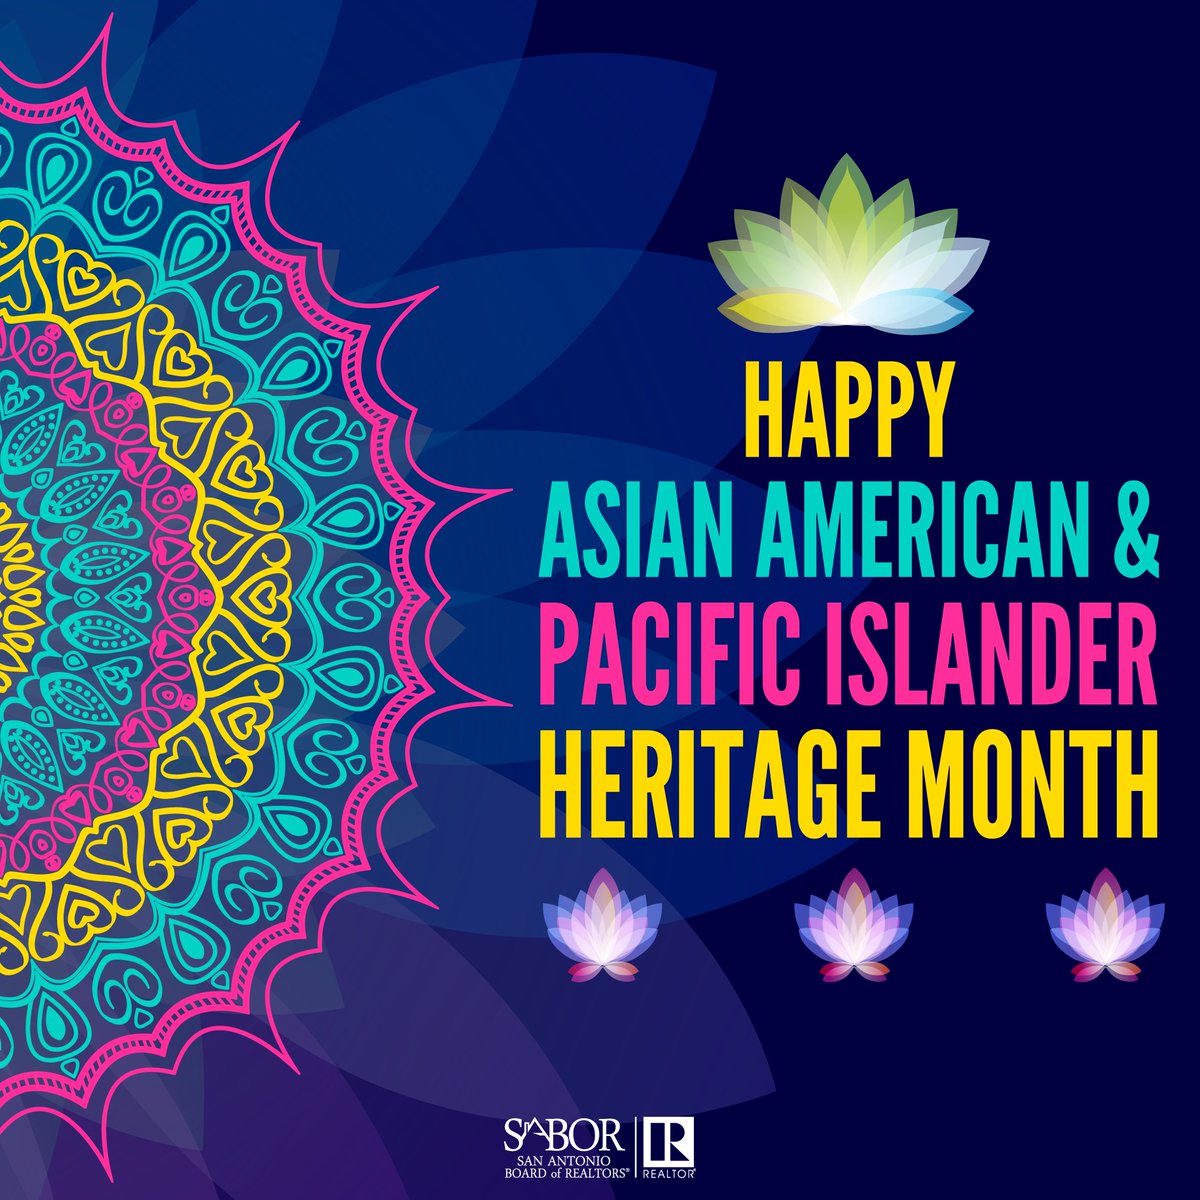 Celebrating Asian American and Pacific Islander Heritage Month!✨ At SABOR, we honor the rich cultural contributions of our AAPI community that enrich our city and our industry.